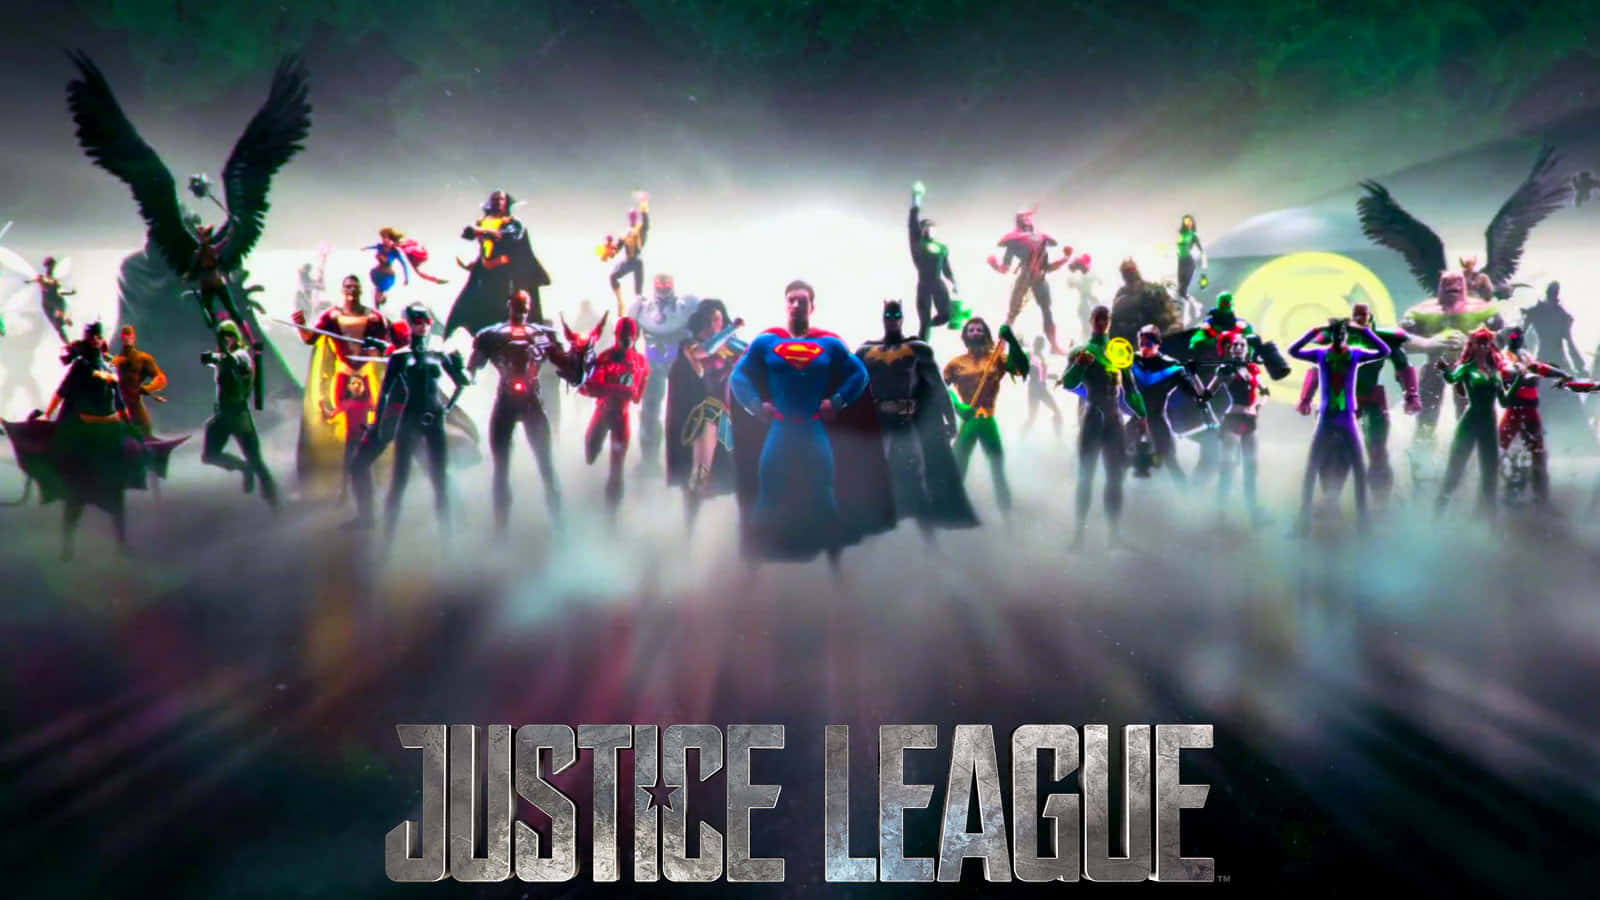 United Heroes of Justice League